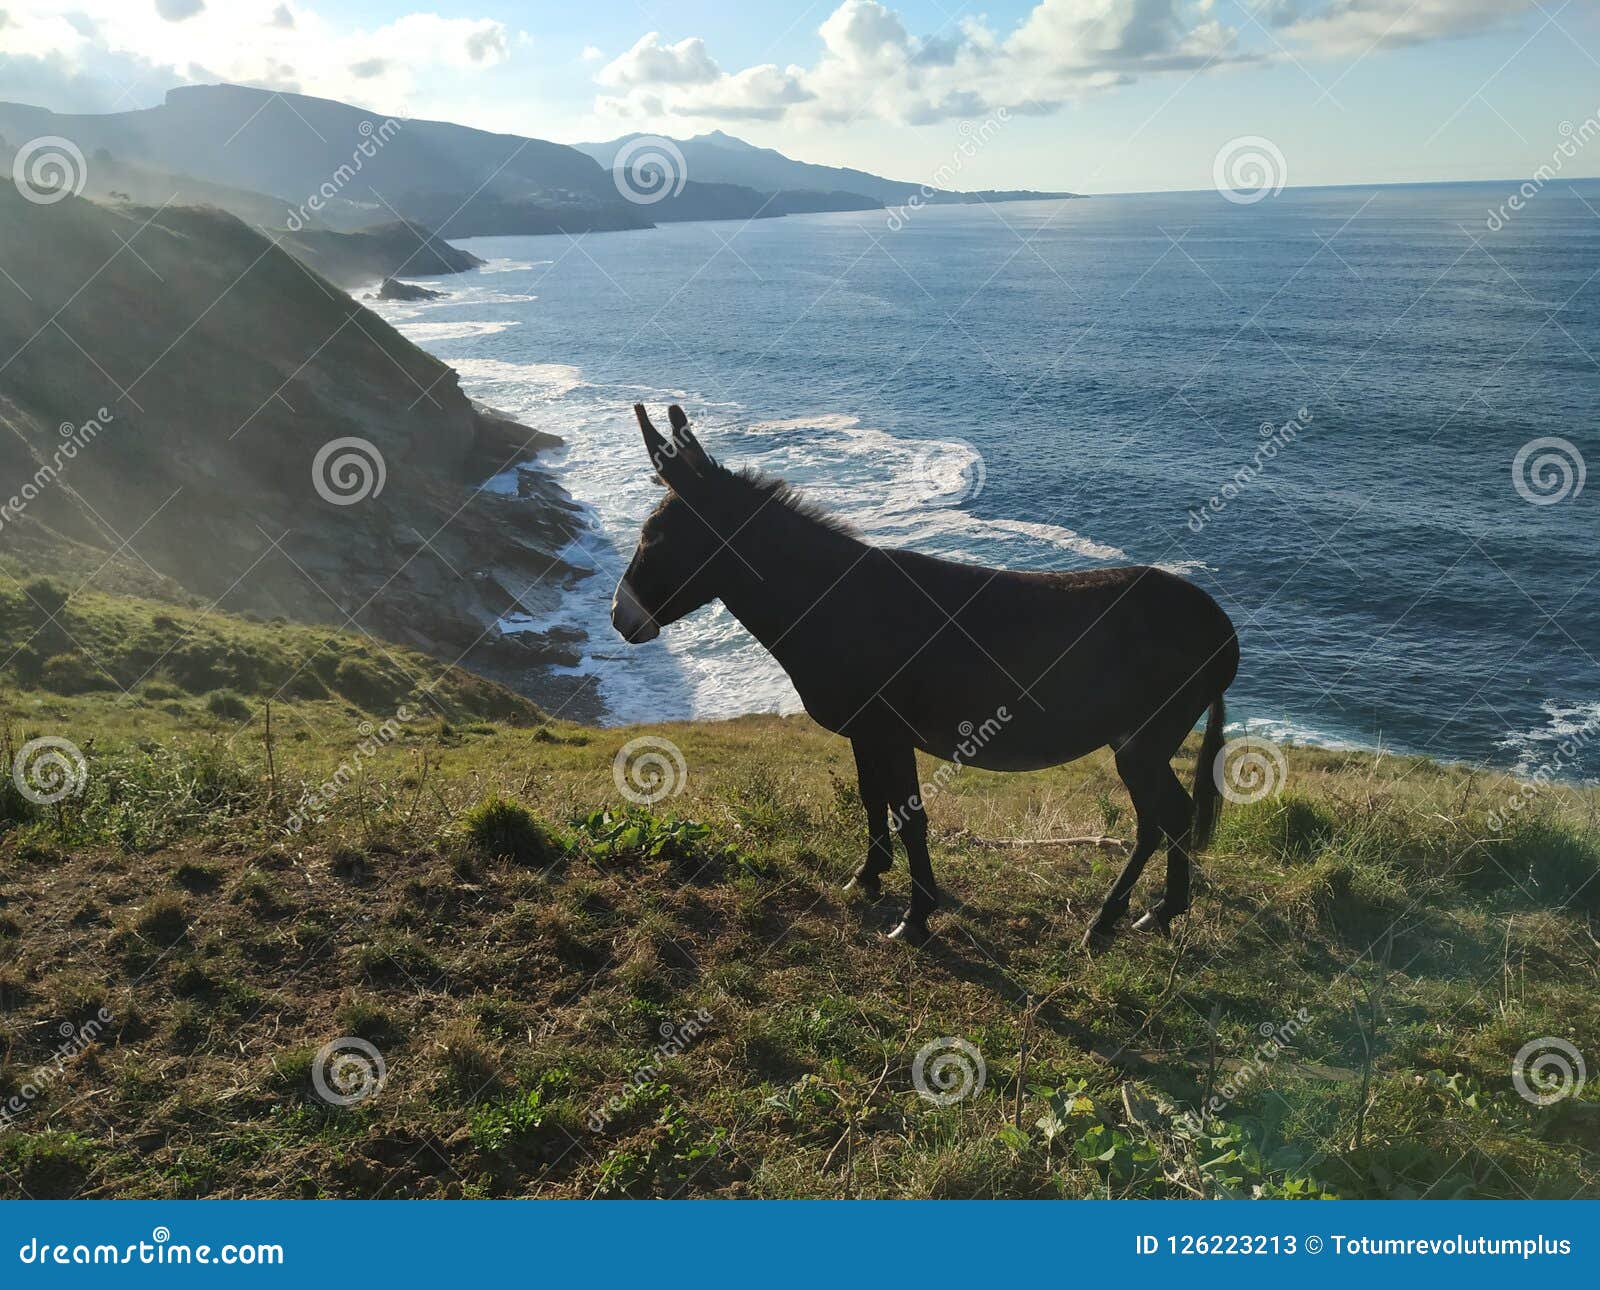 donkey free on the mountain with grass and sea of background